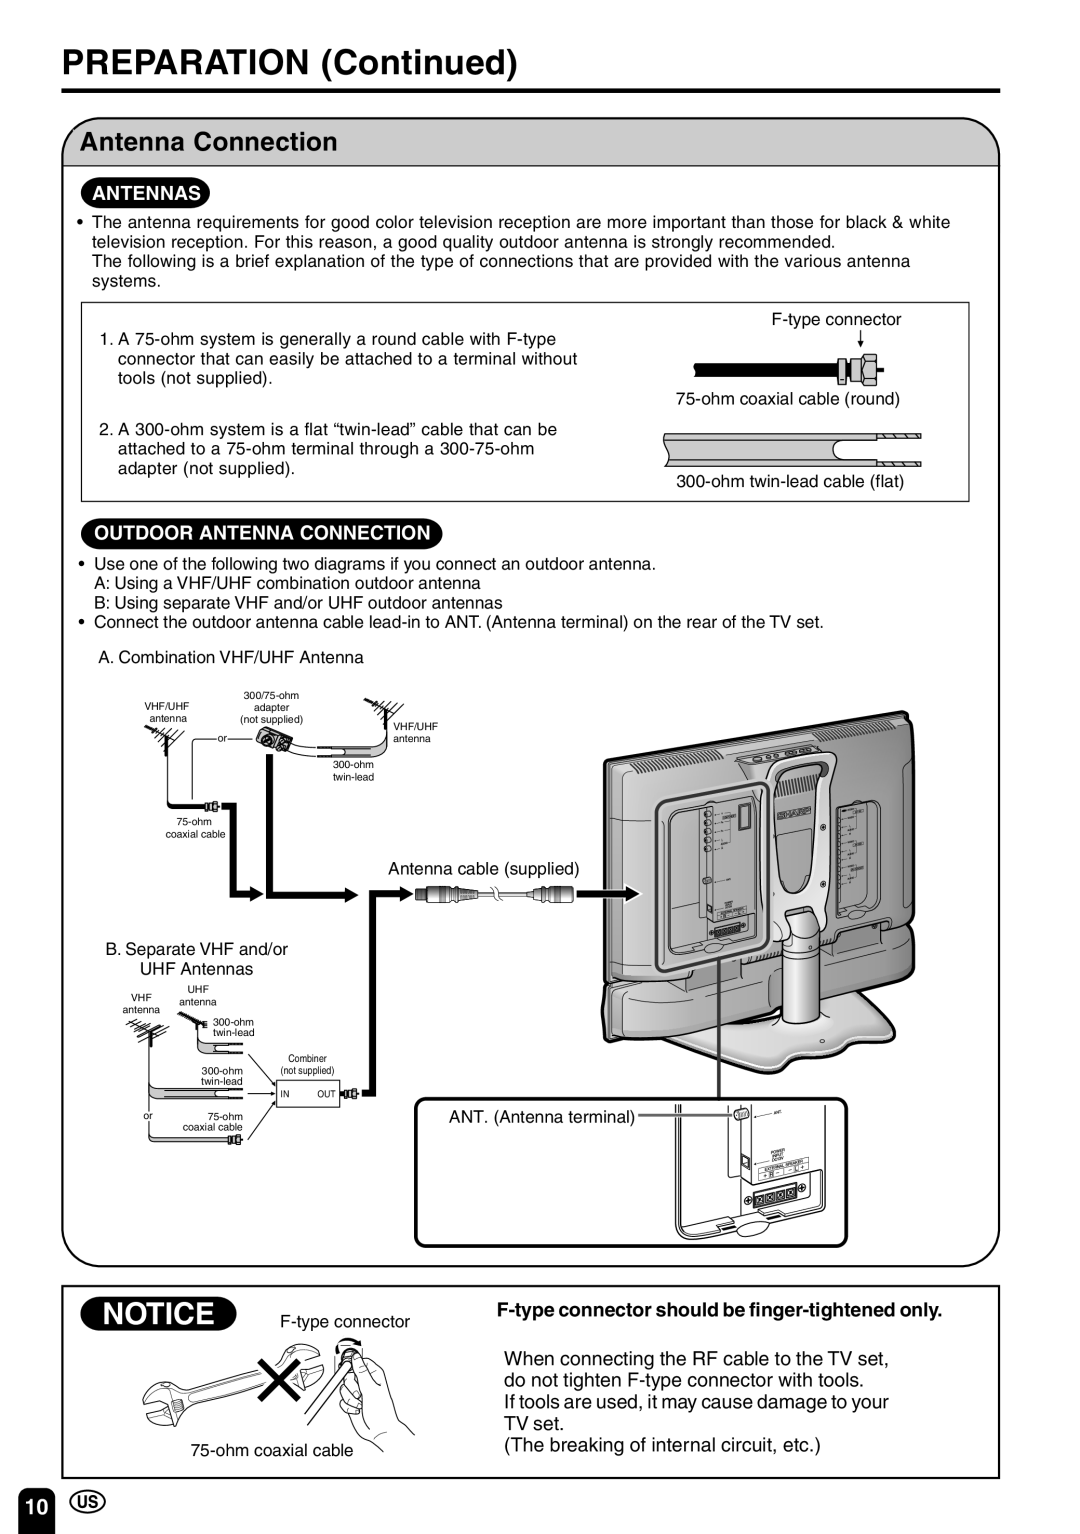 Sharp LC-22SV6U operation manual PREPARATION Continued, Antennas, Outdoor Antenna Connection 